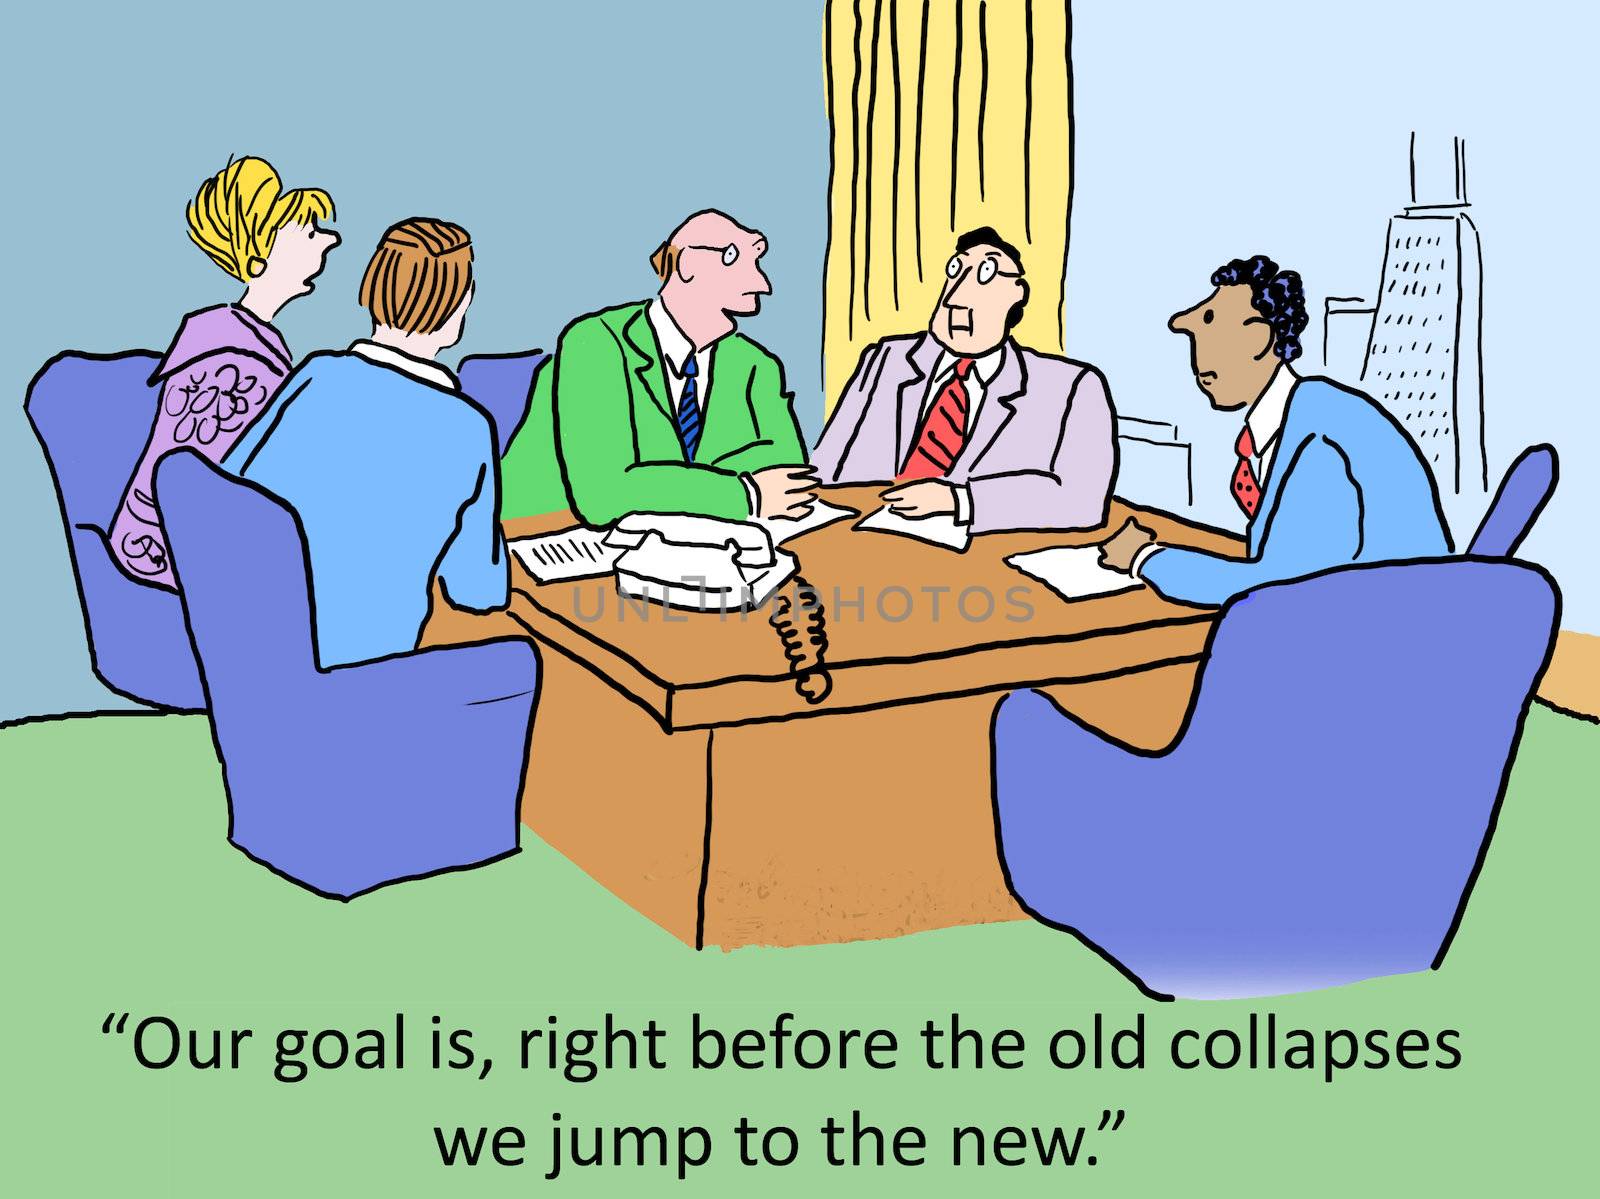 "Our goal is, right before the old collapses we jump to the new."